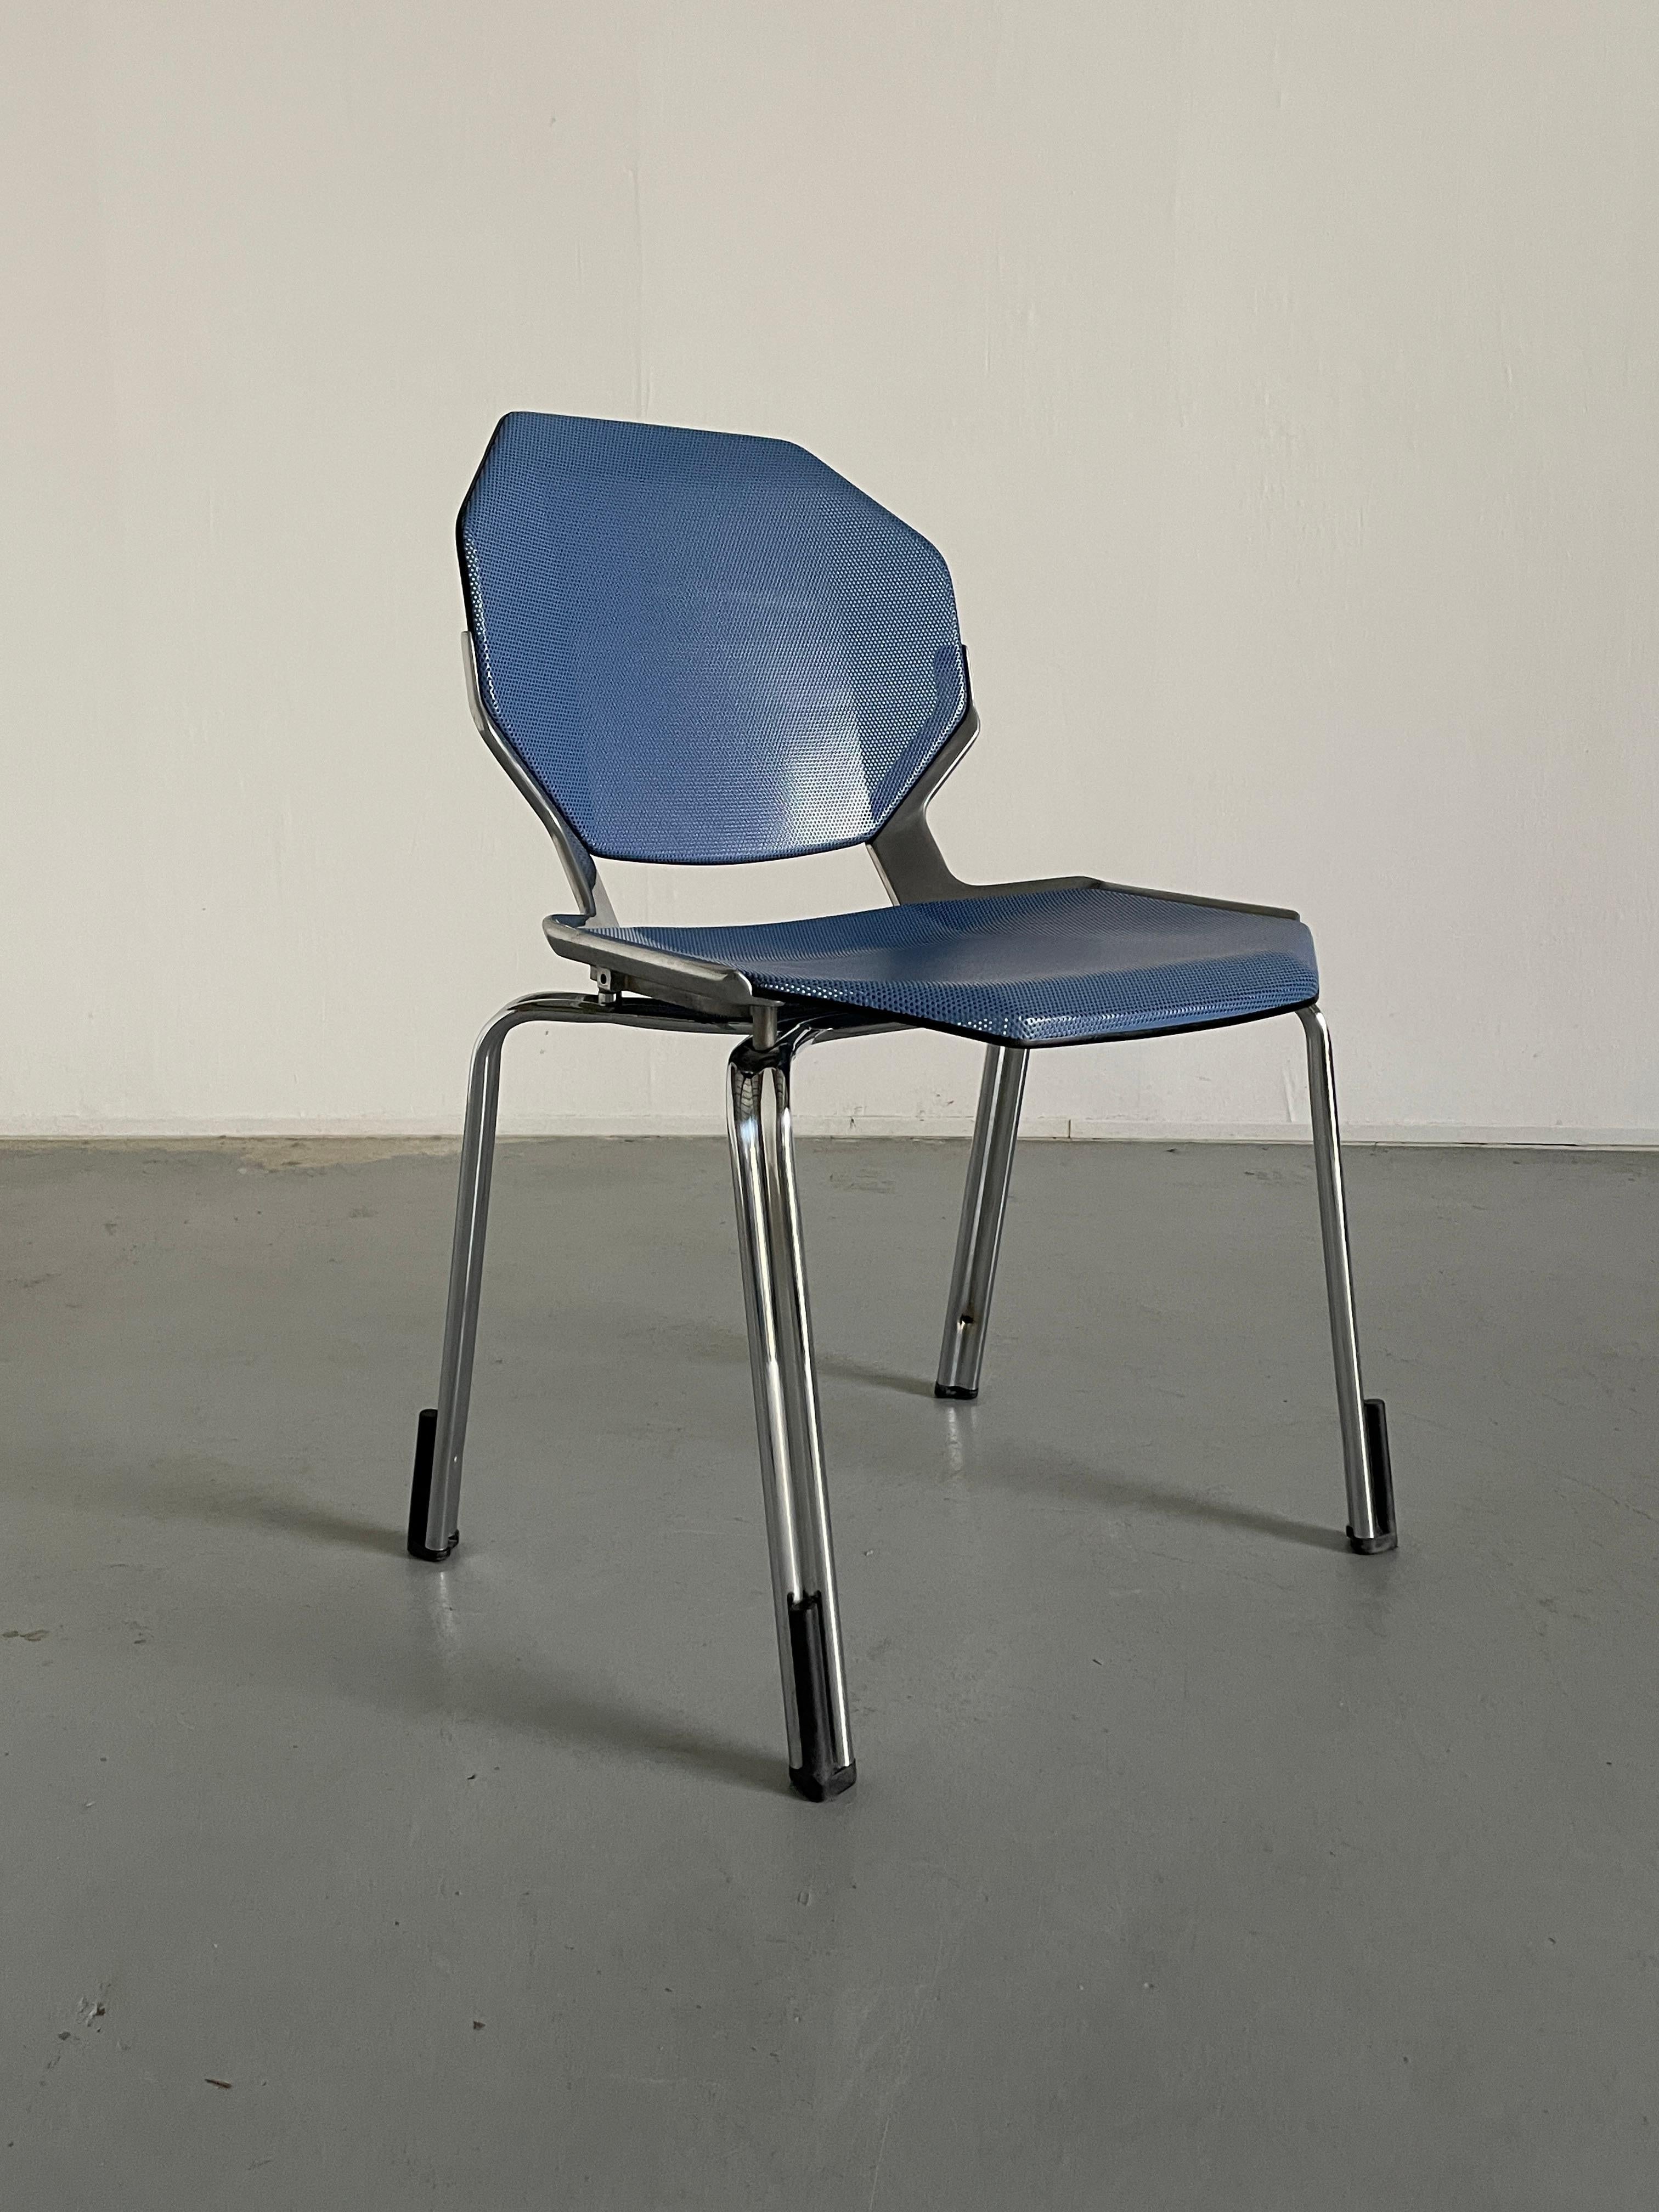 Set of unique space age or atomic age dining chairs or visitor chairs in blue and green produced by Fröscher Sitform, 1990s Germany.
Octagonal futuristic shapes and design. 

Robust and high production quality. Entirely made from metal, with